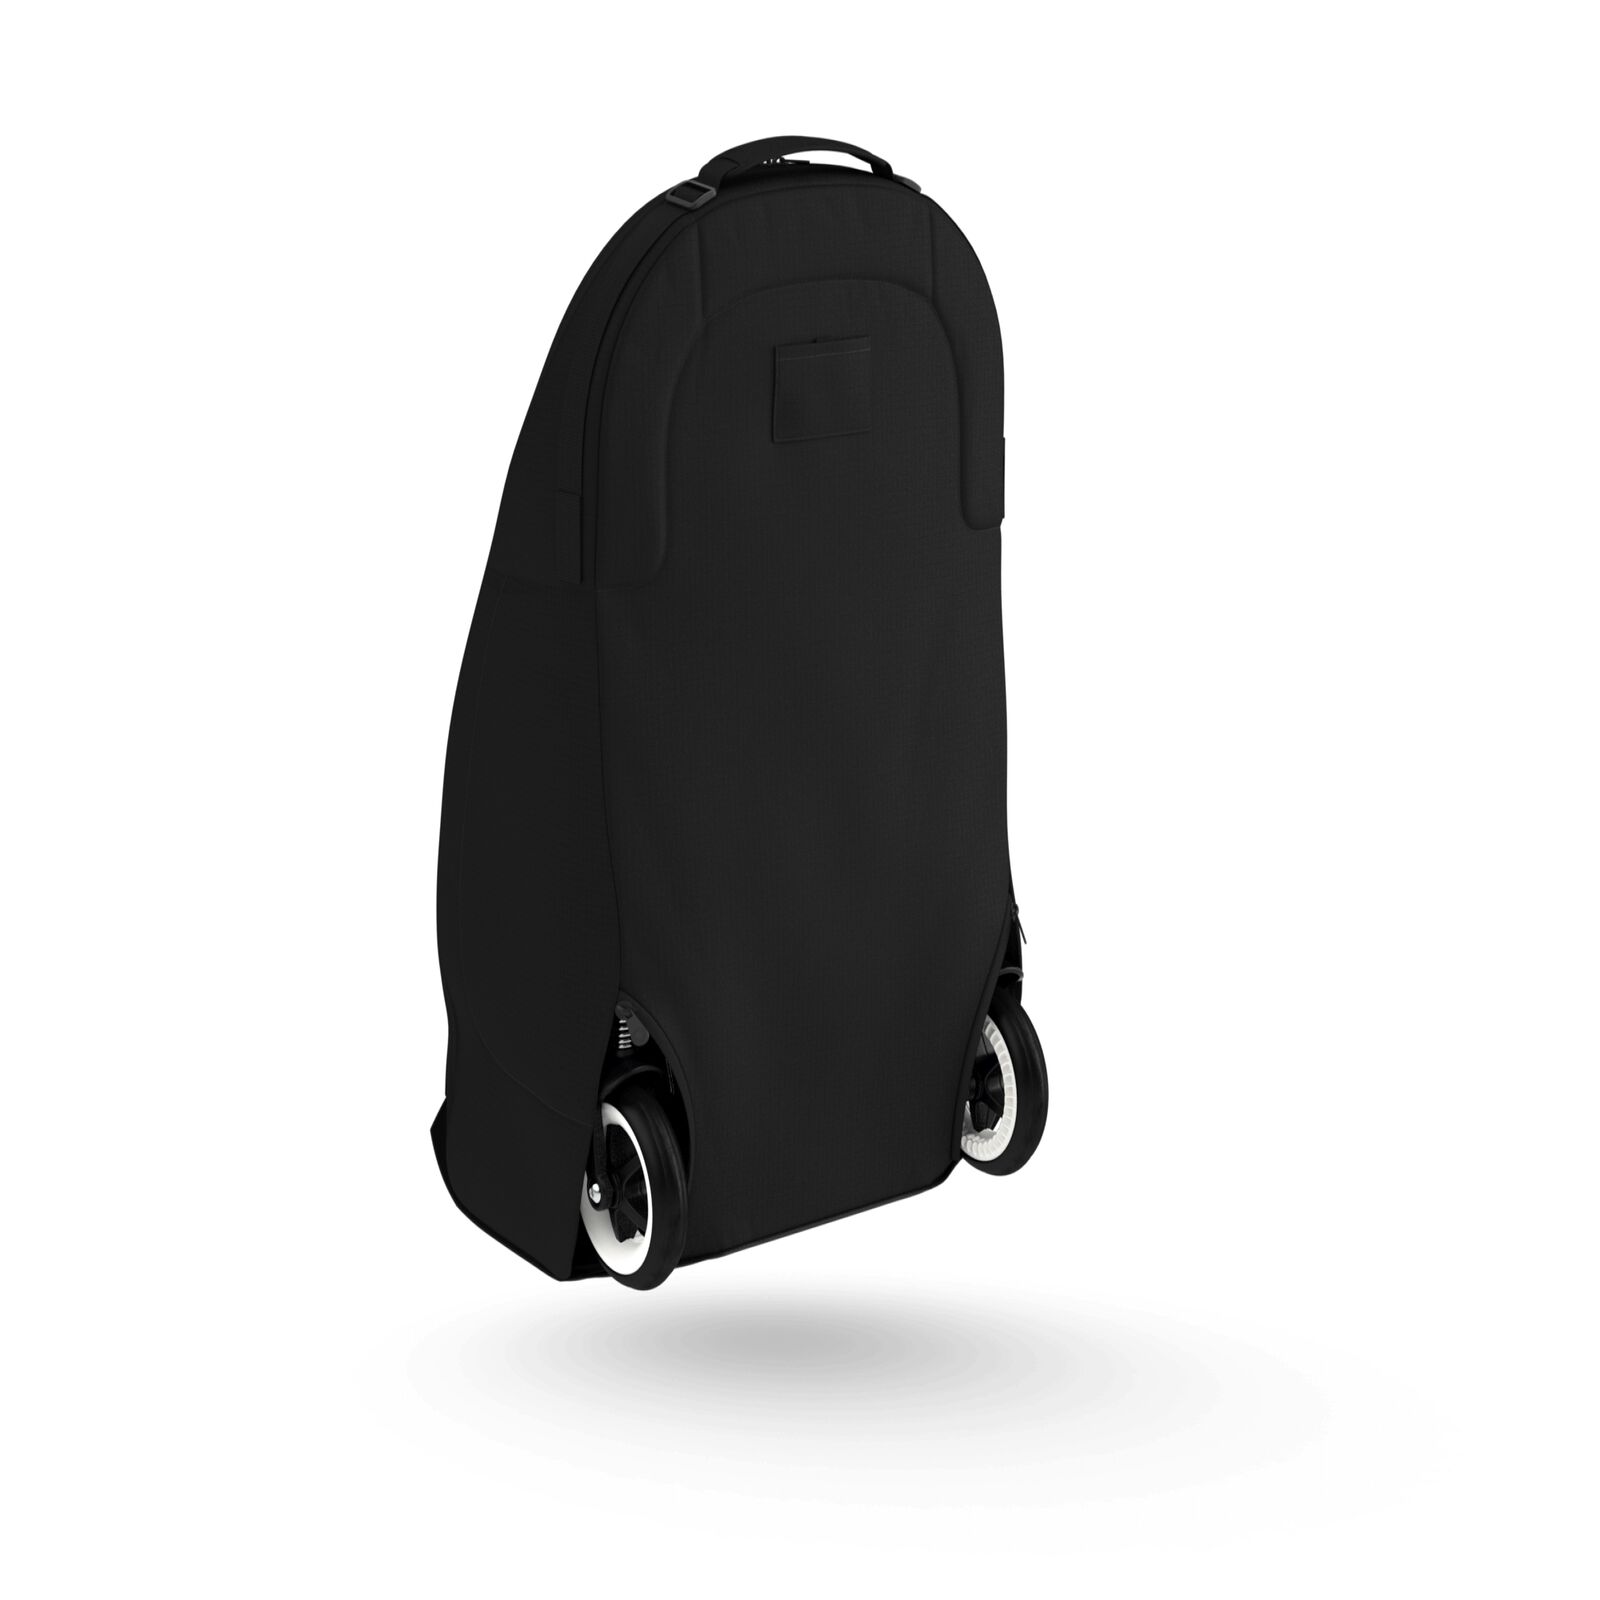 Bugaboo compact transport bag - View 6